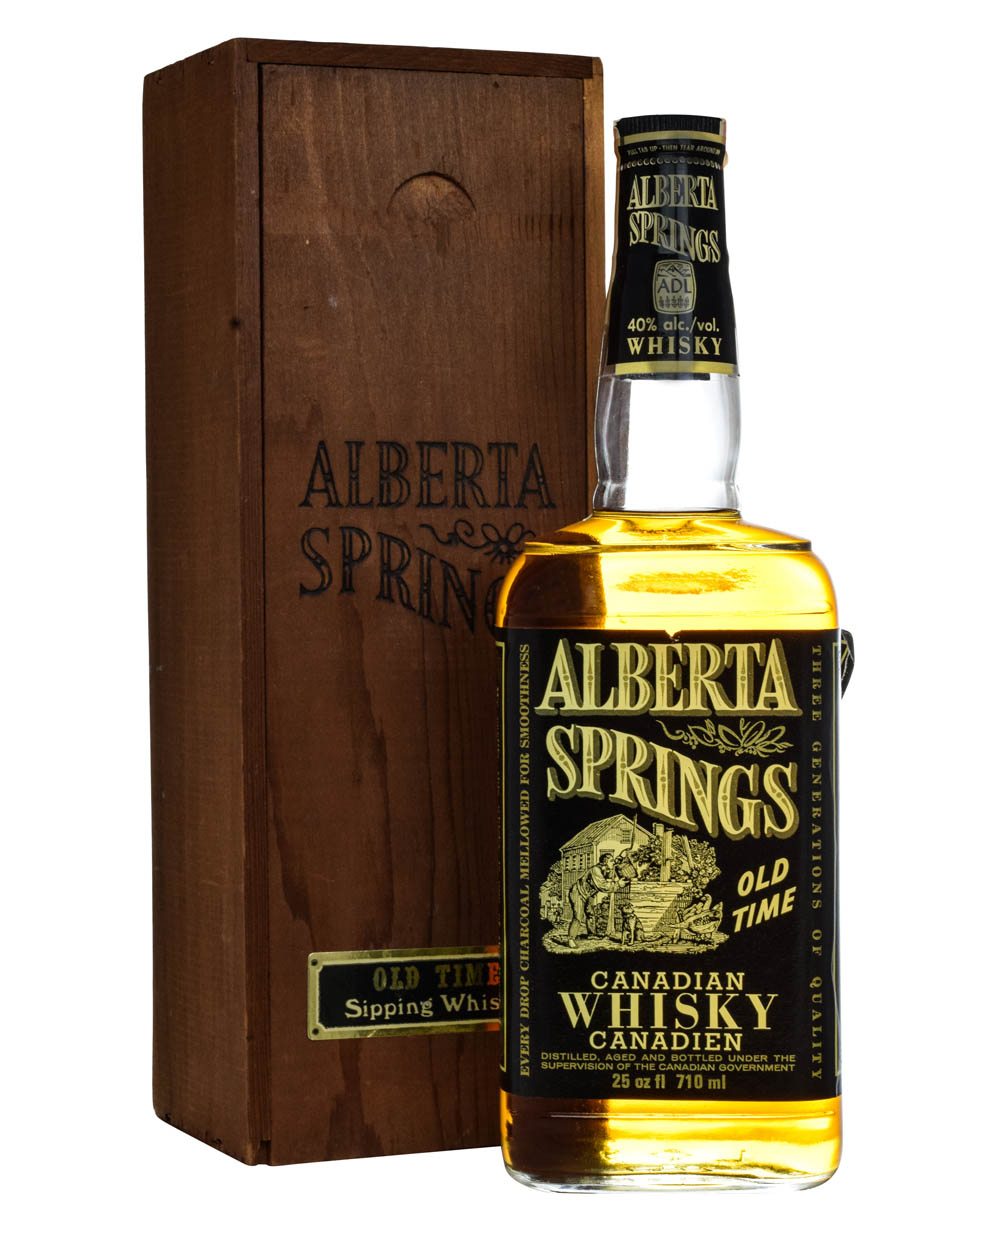 Alberta Springs Canadian Whisky Box Musthave Malts MHM